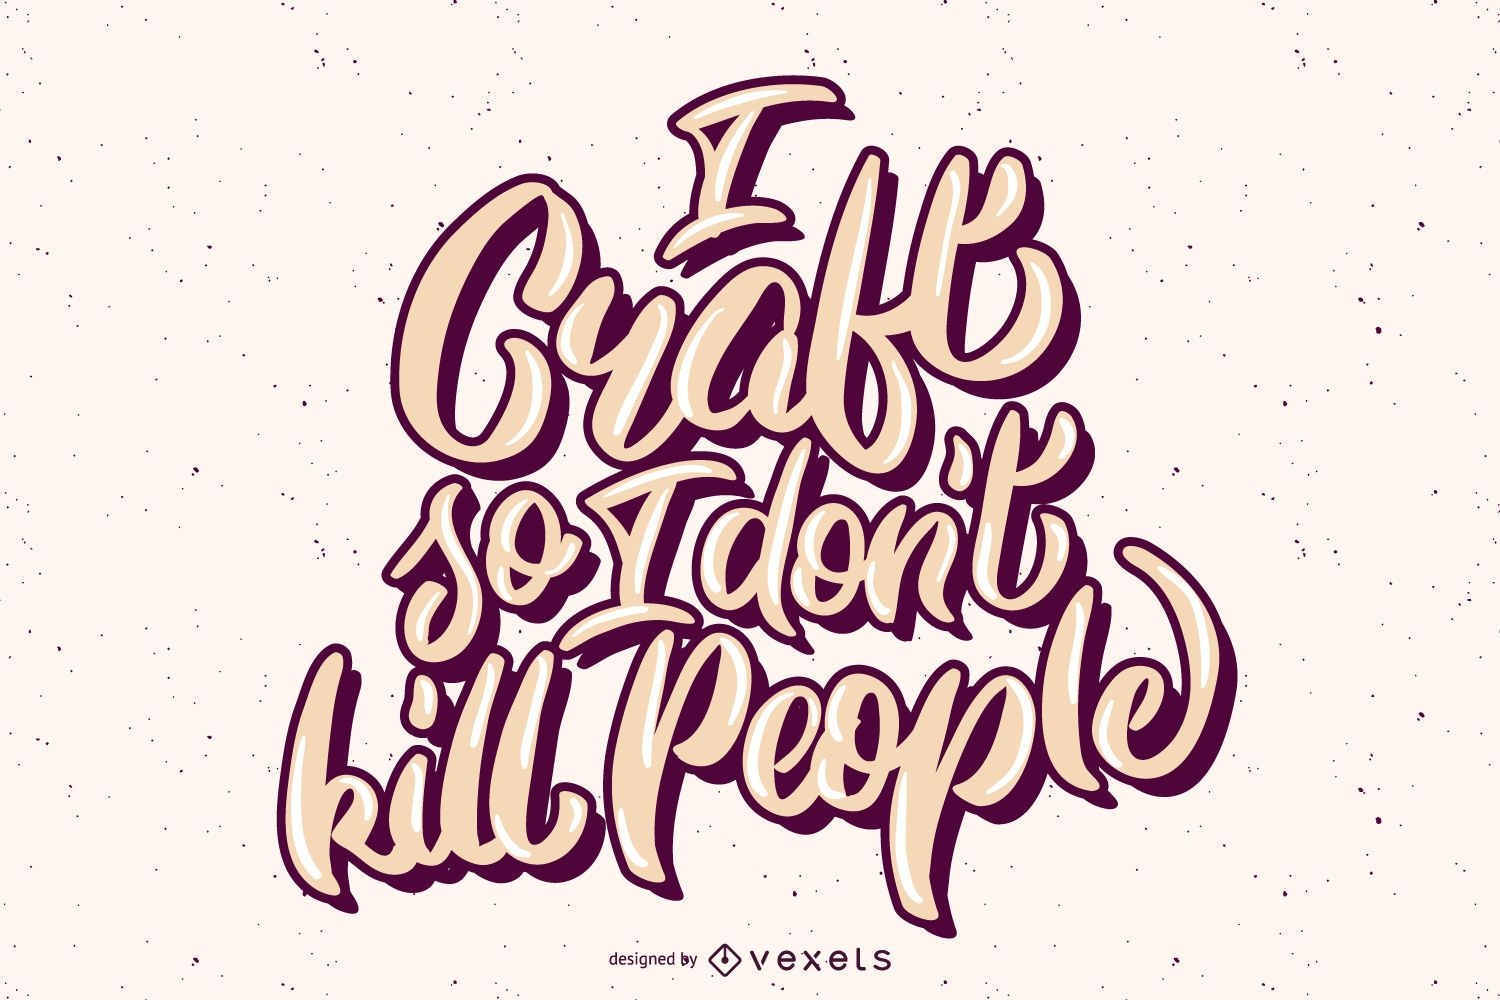 Funny crafting lettering design